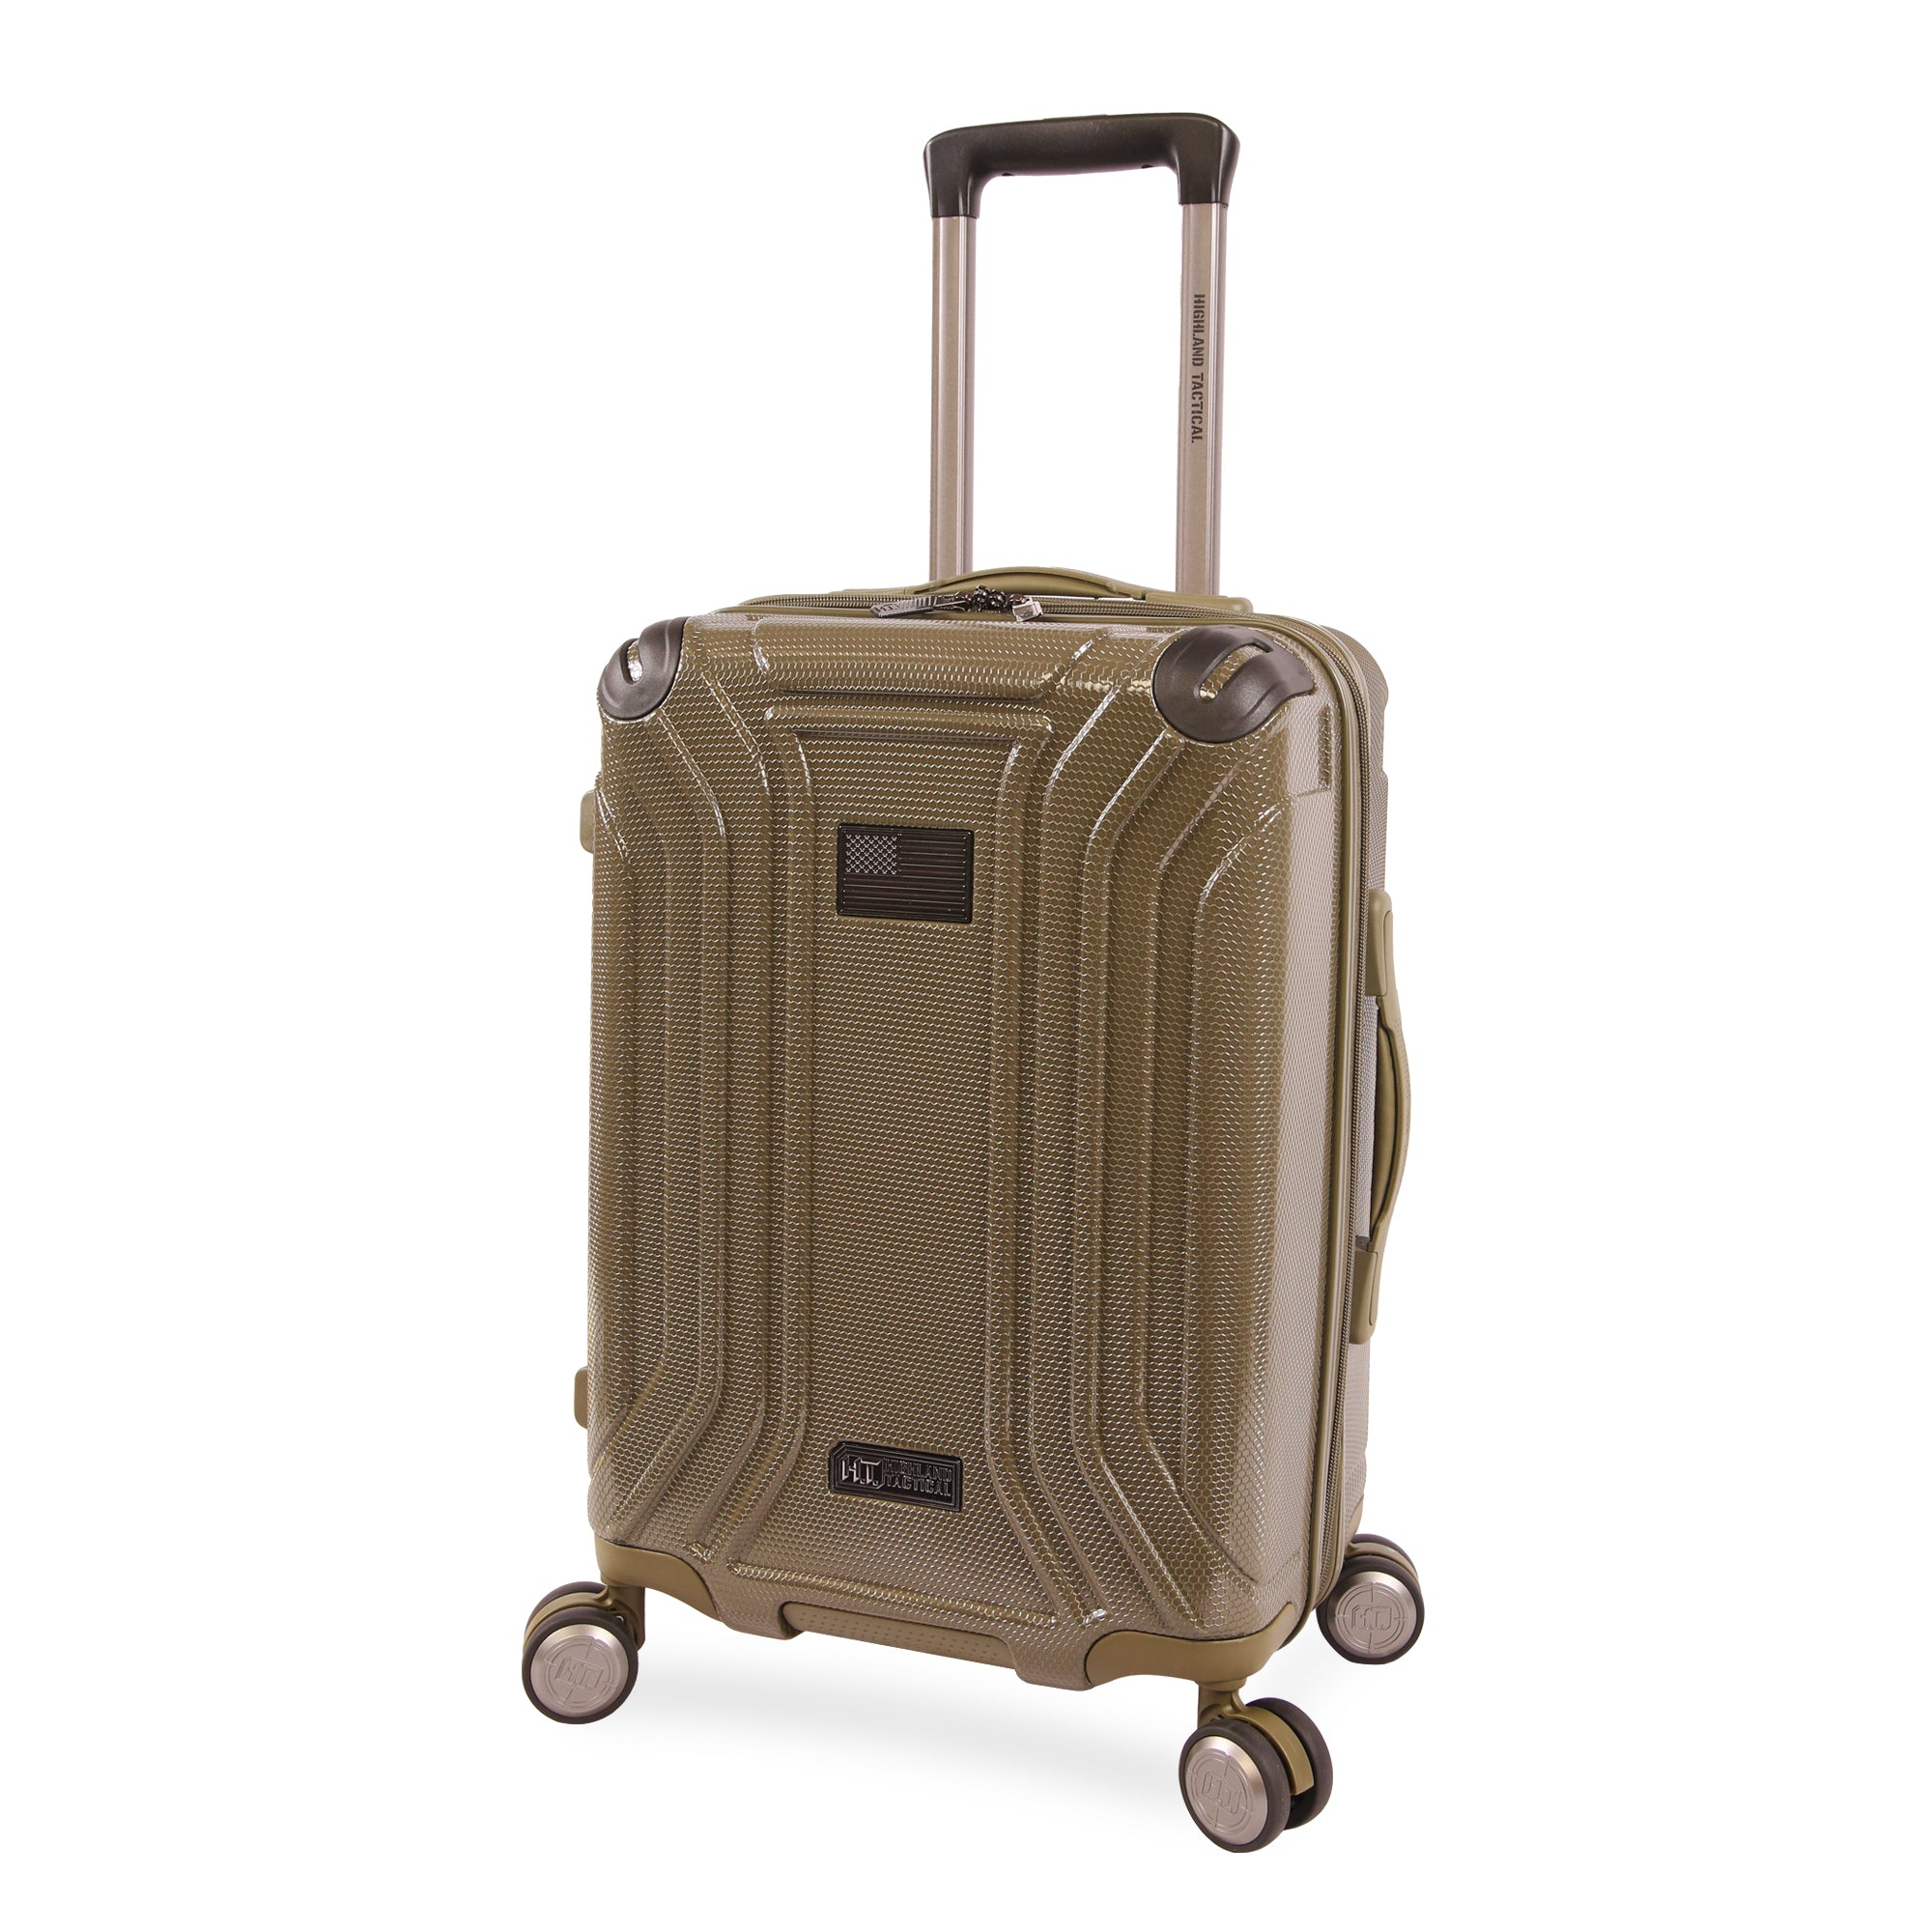 ARMOR Luggage 21" Carry-on Luggage